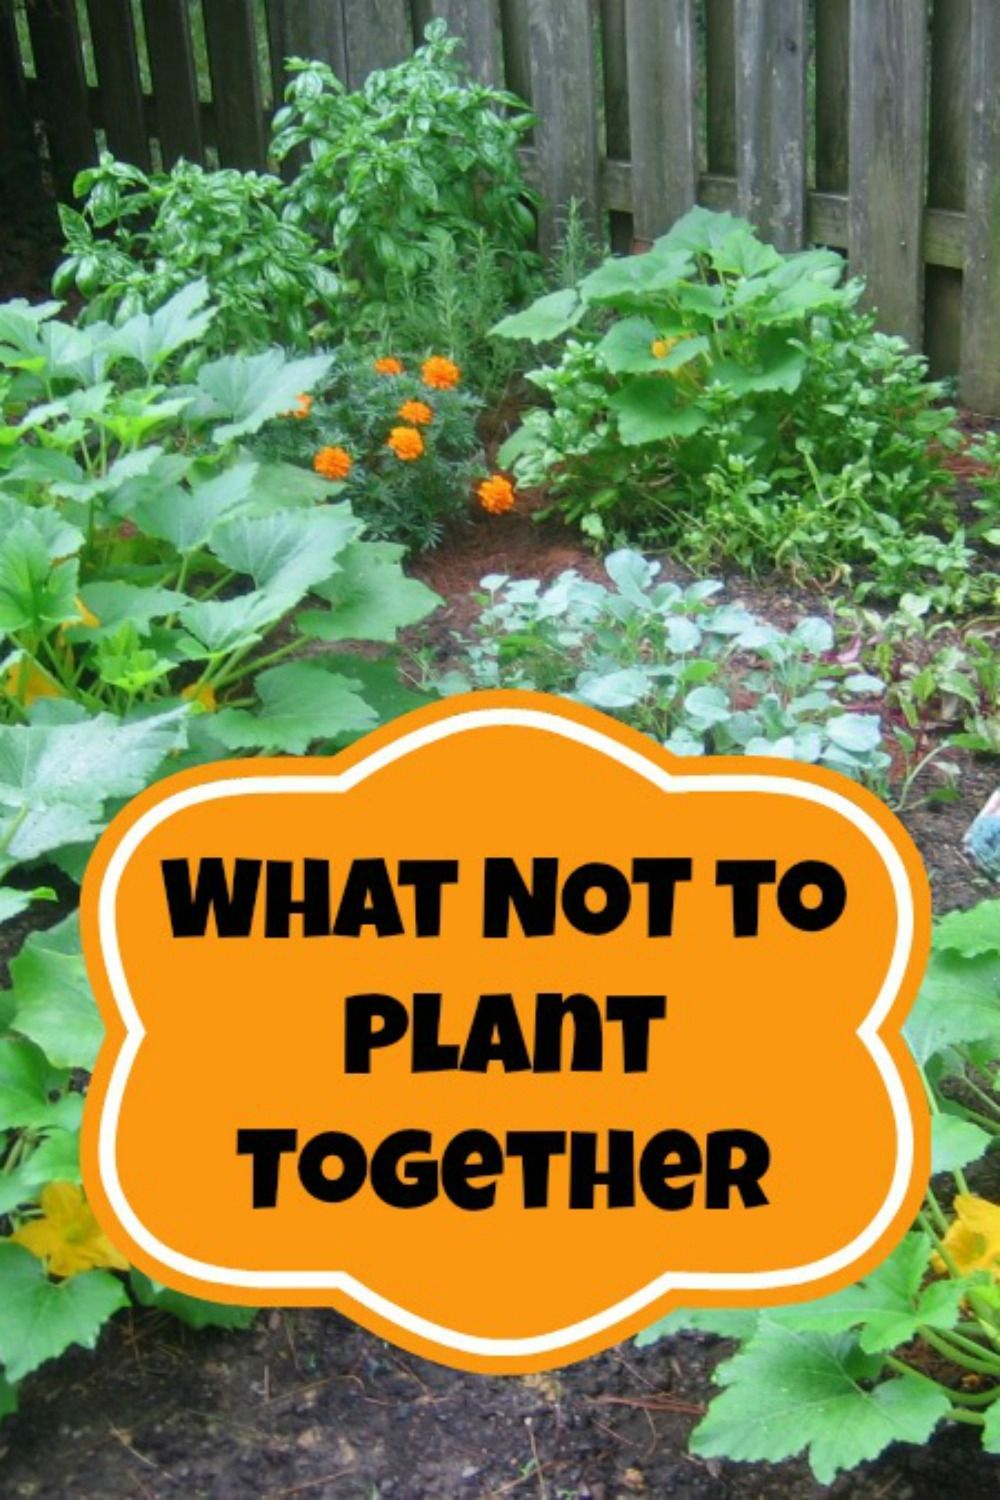 Often times when we talk about Companion Planting we discuss the plants that should always be planted side-by-side in our gardens.